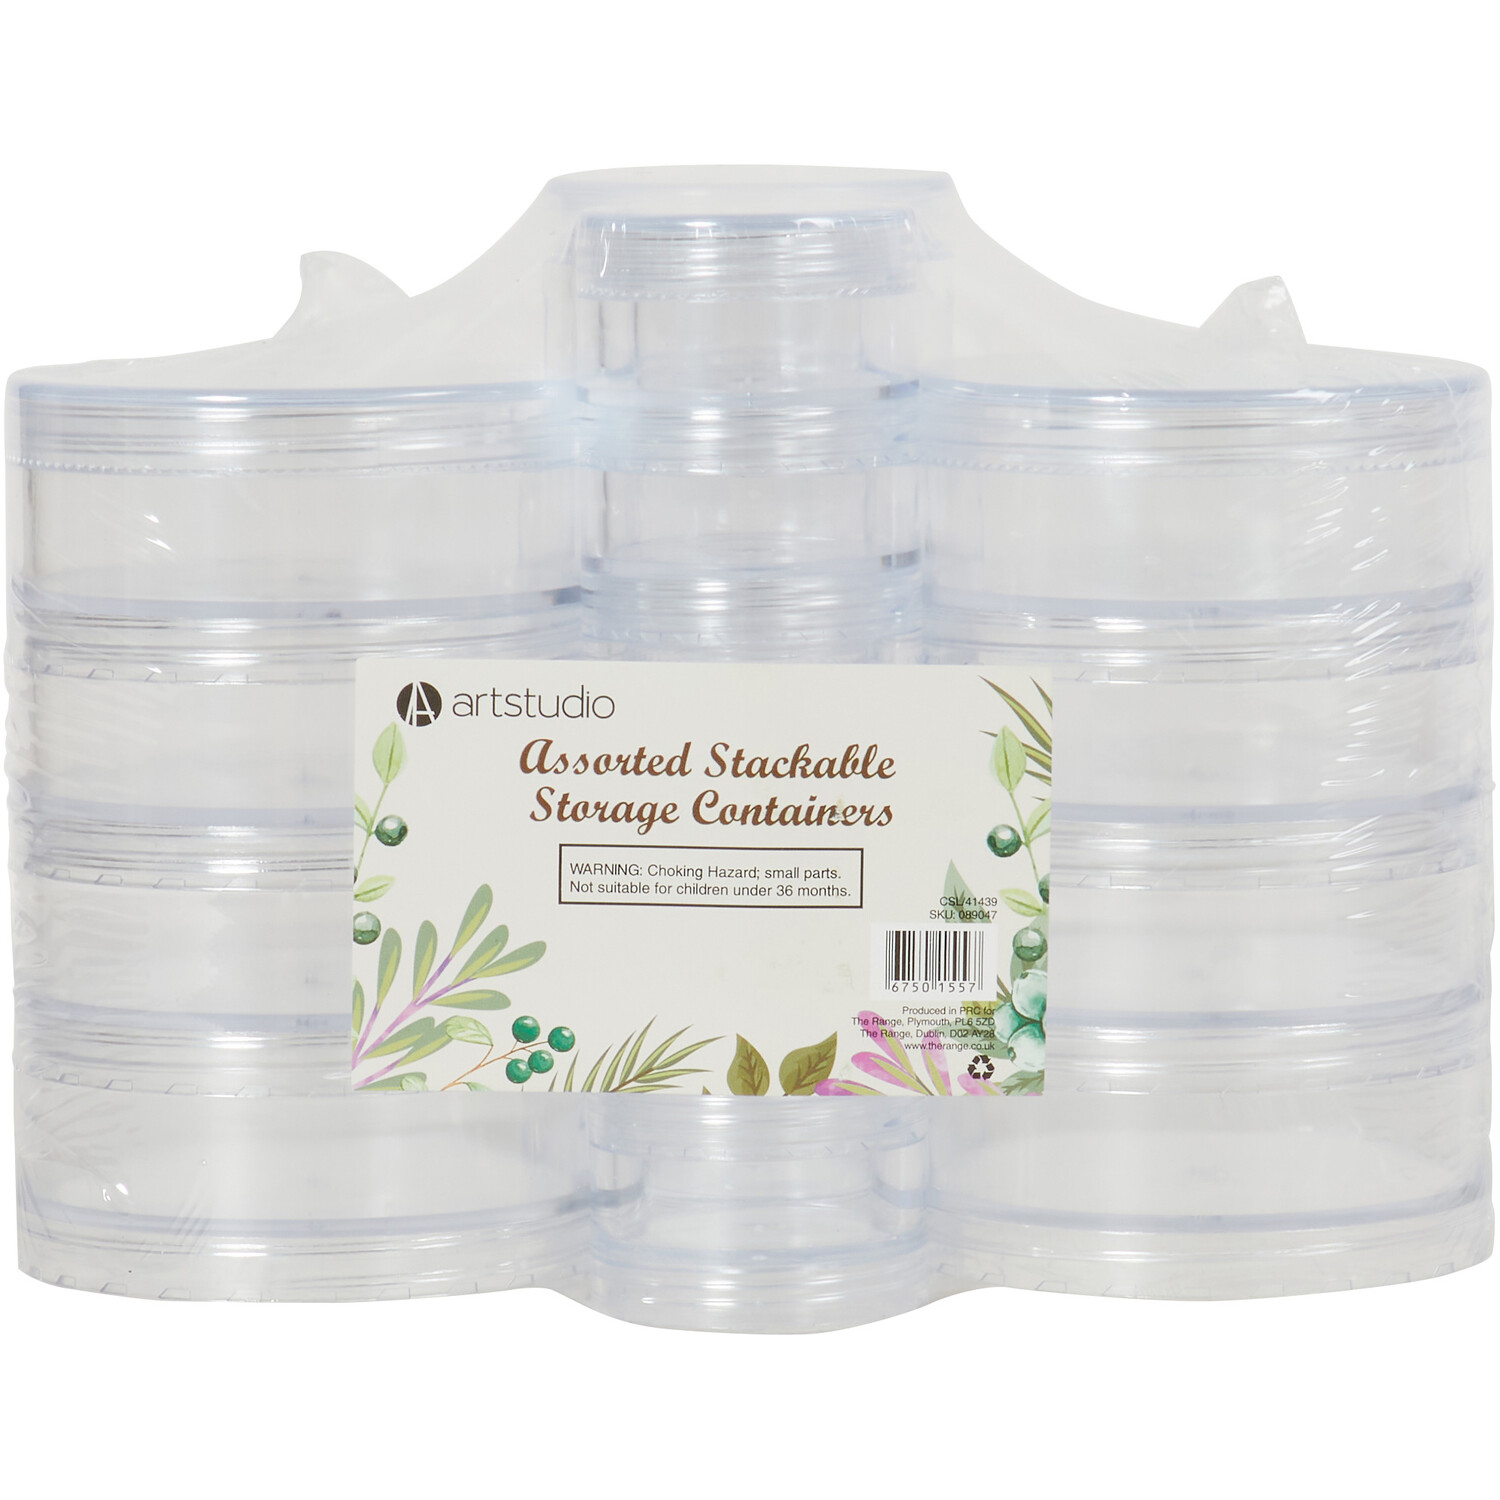 Assorted Stackable Storage Containers Image 1